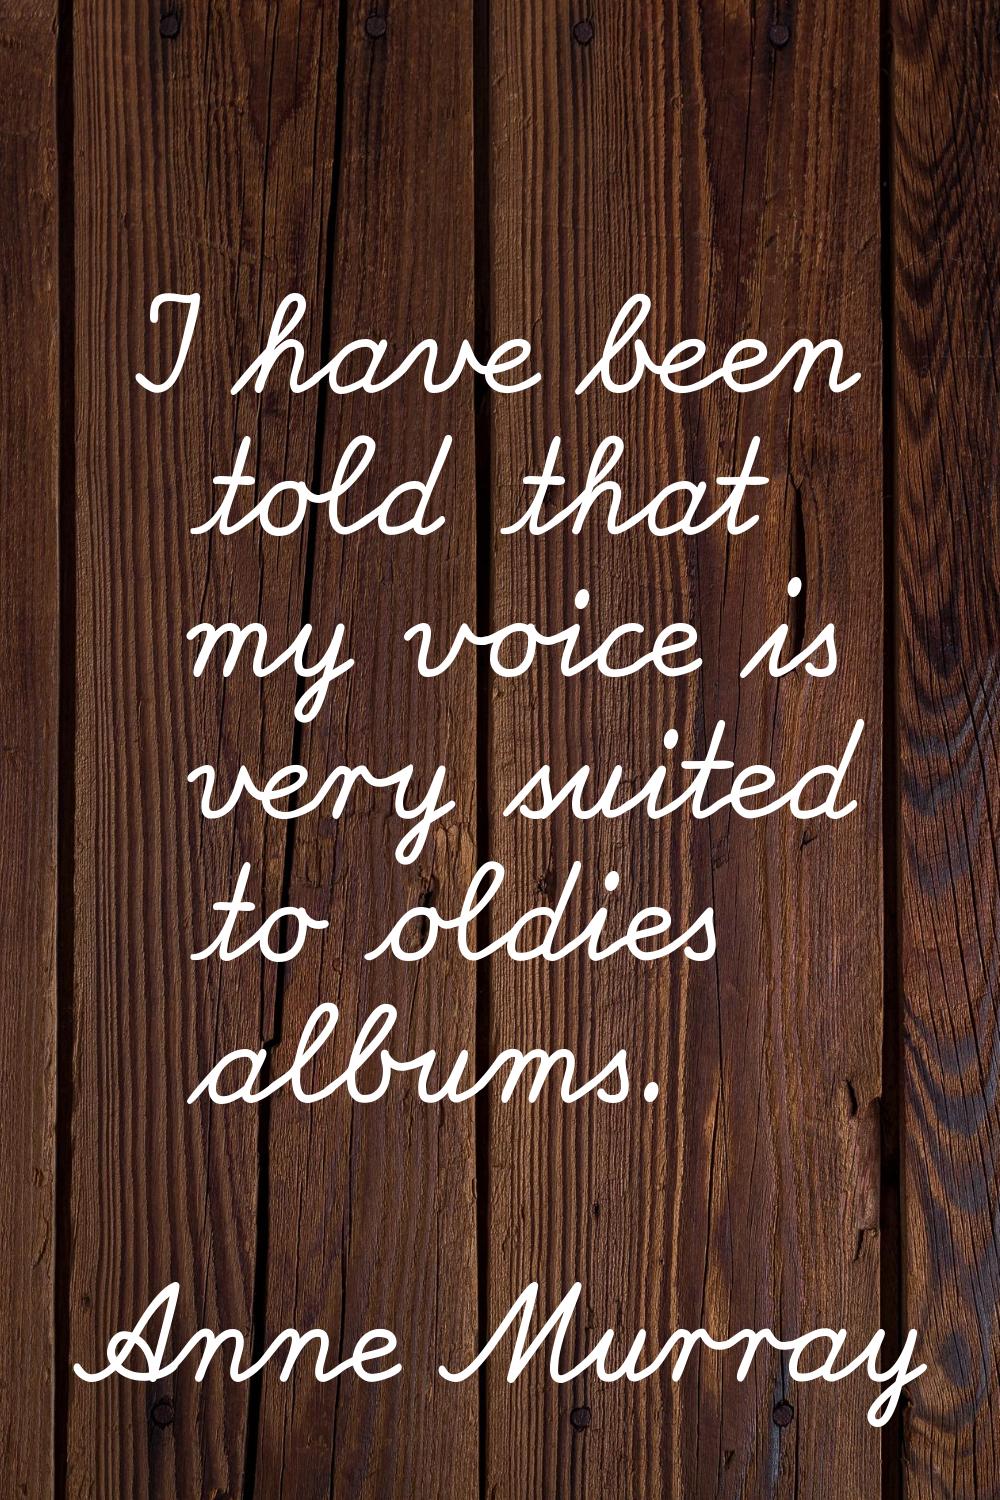 I have been told that my voice is very suited to oldies albums.